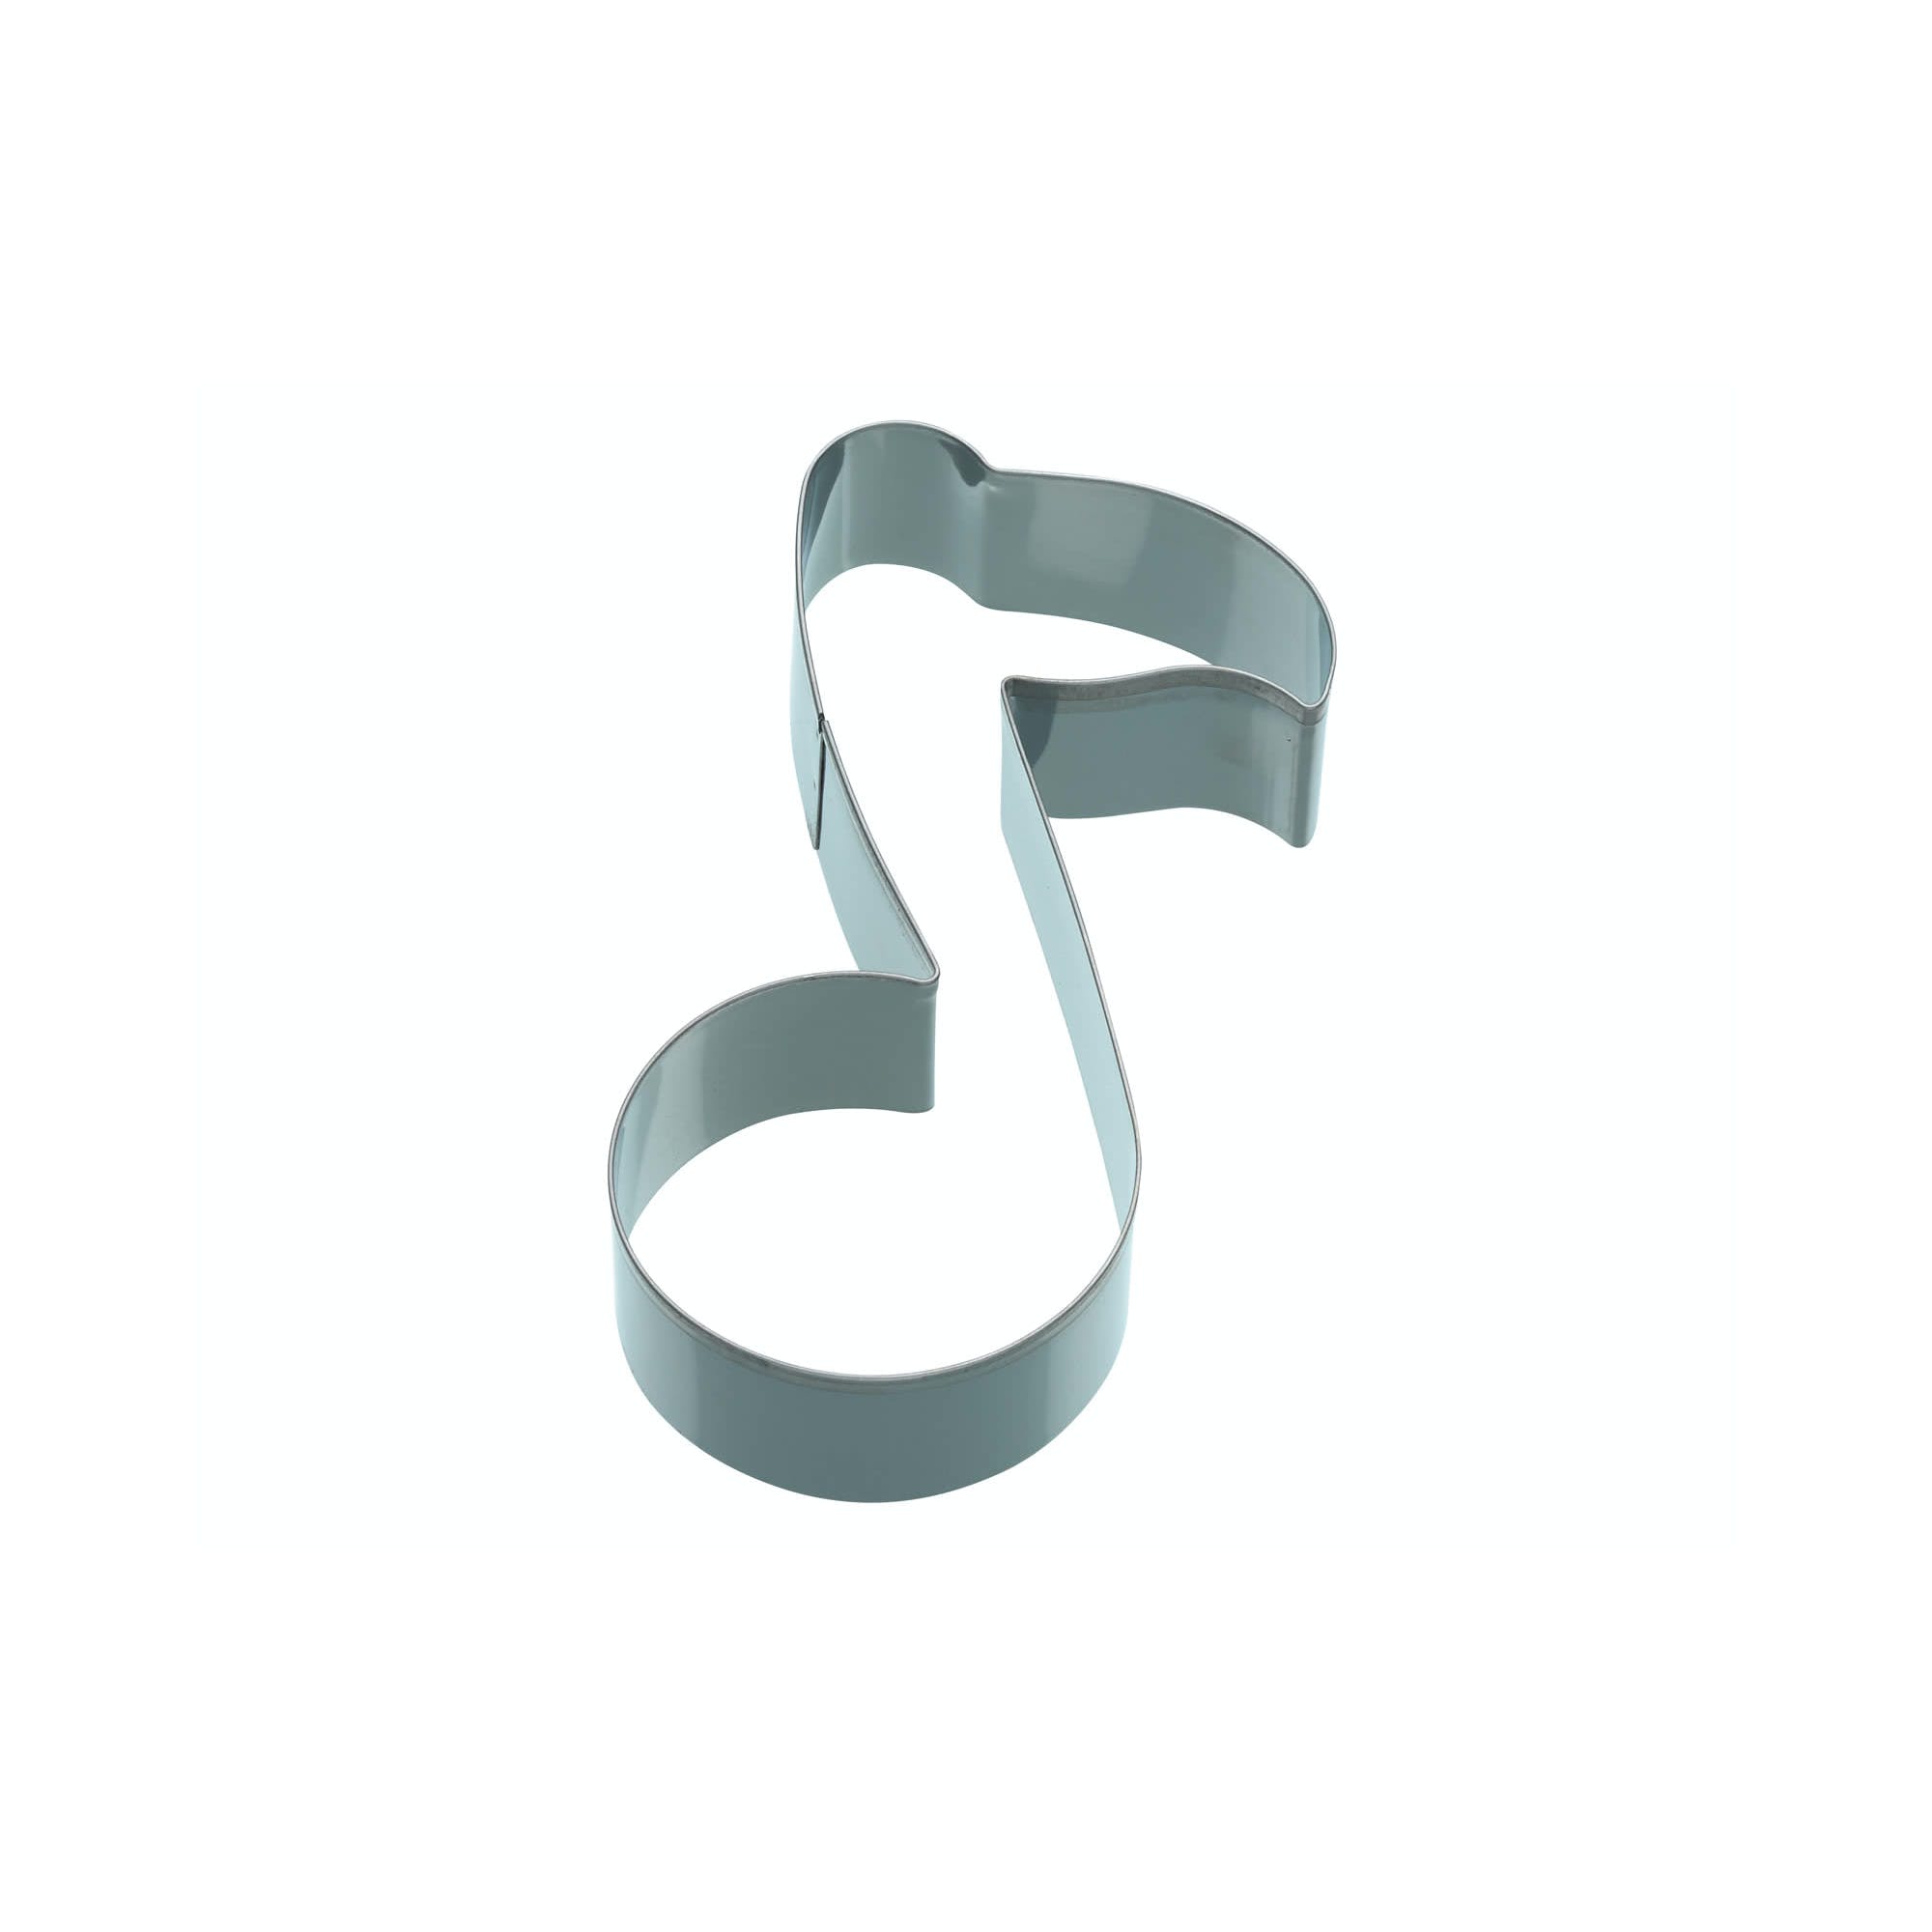 KitchenCraft 12cm Music Note Treble Clef Shaped Cookie Cutter - The Cooks Cupboard Ltd